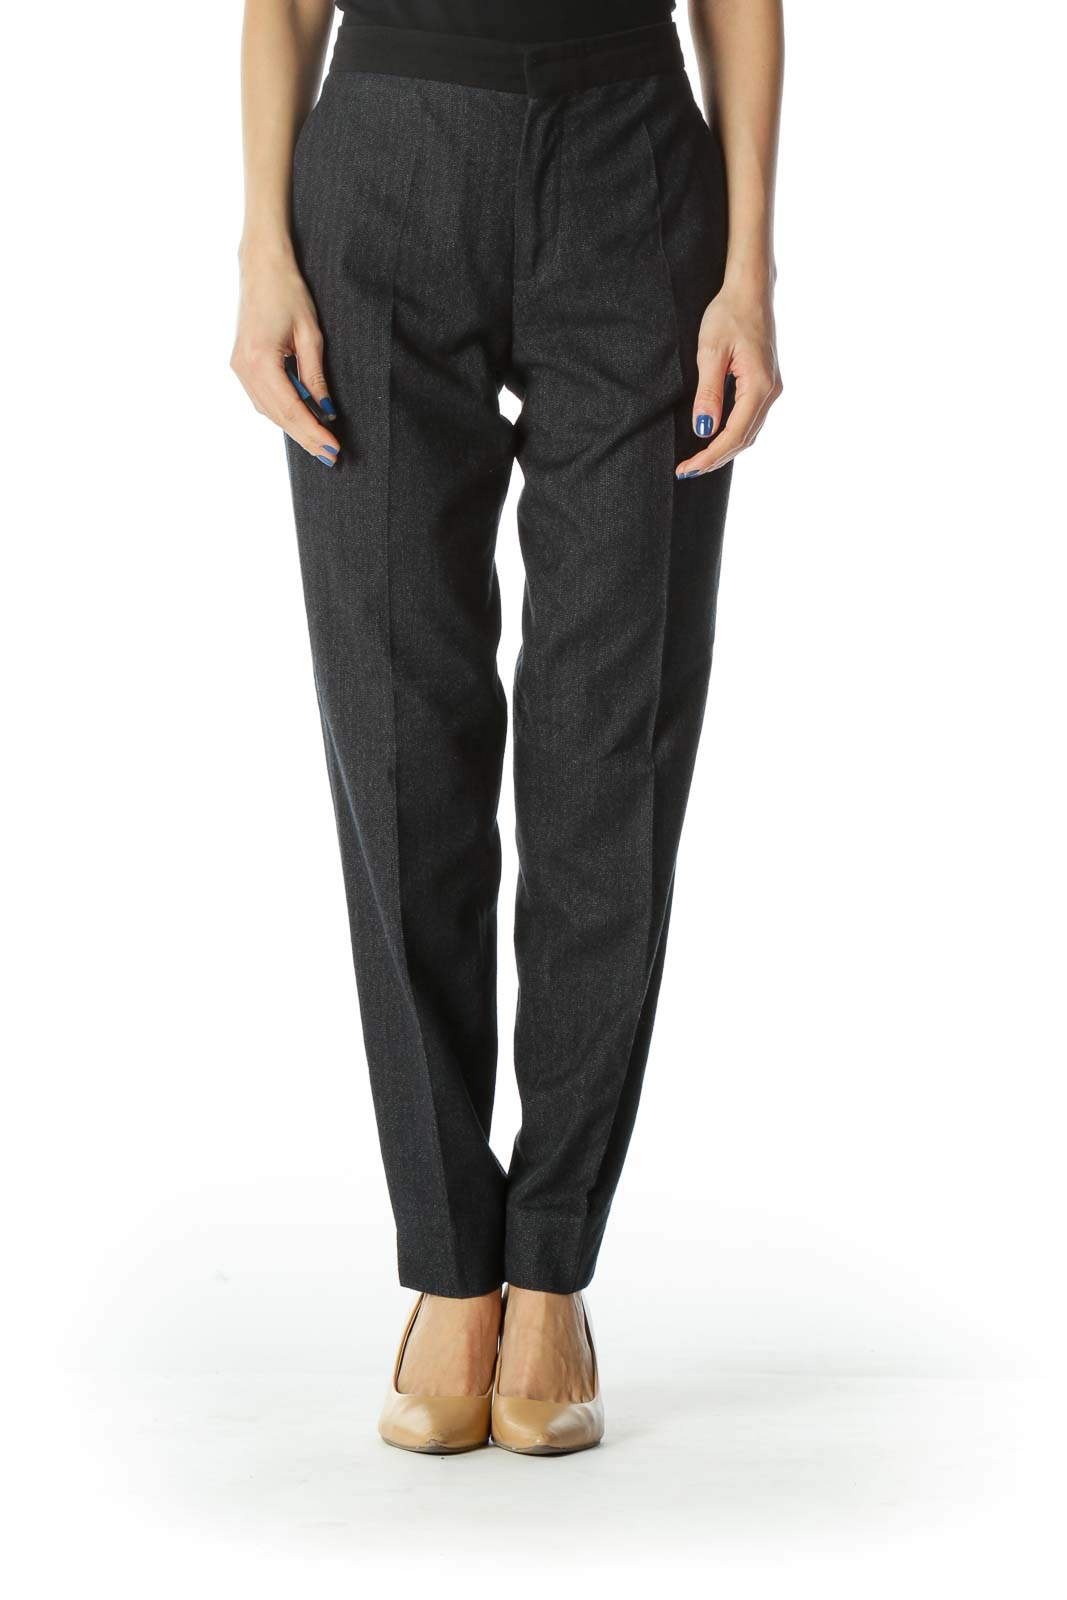 Black Twill Skinny Suit Pant Front